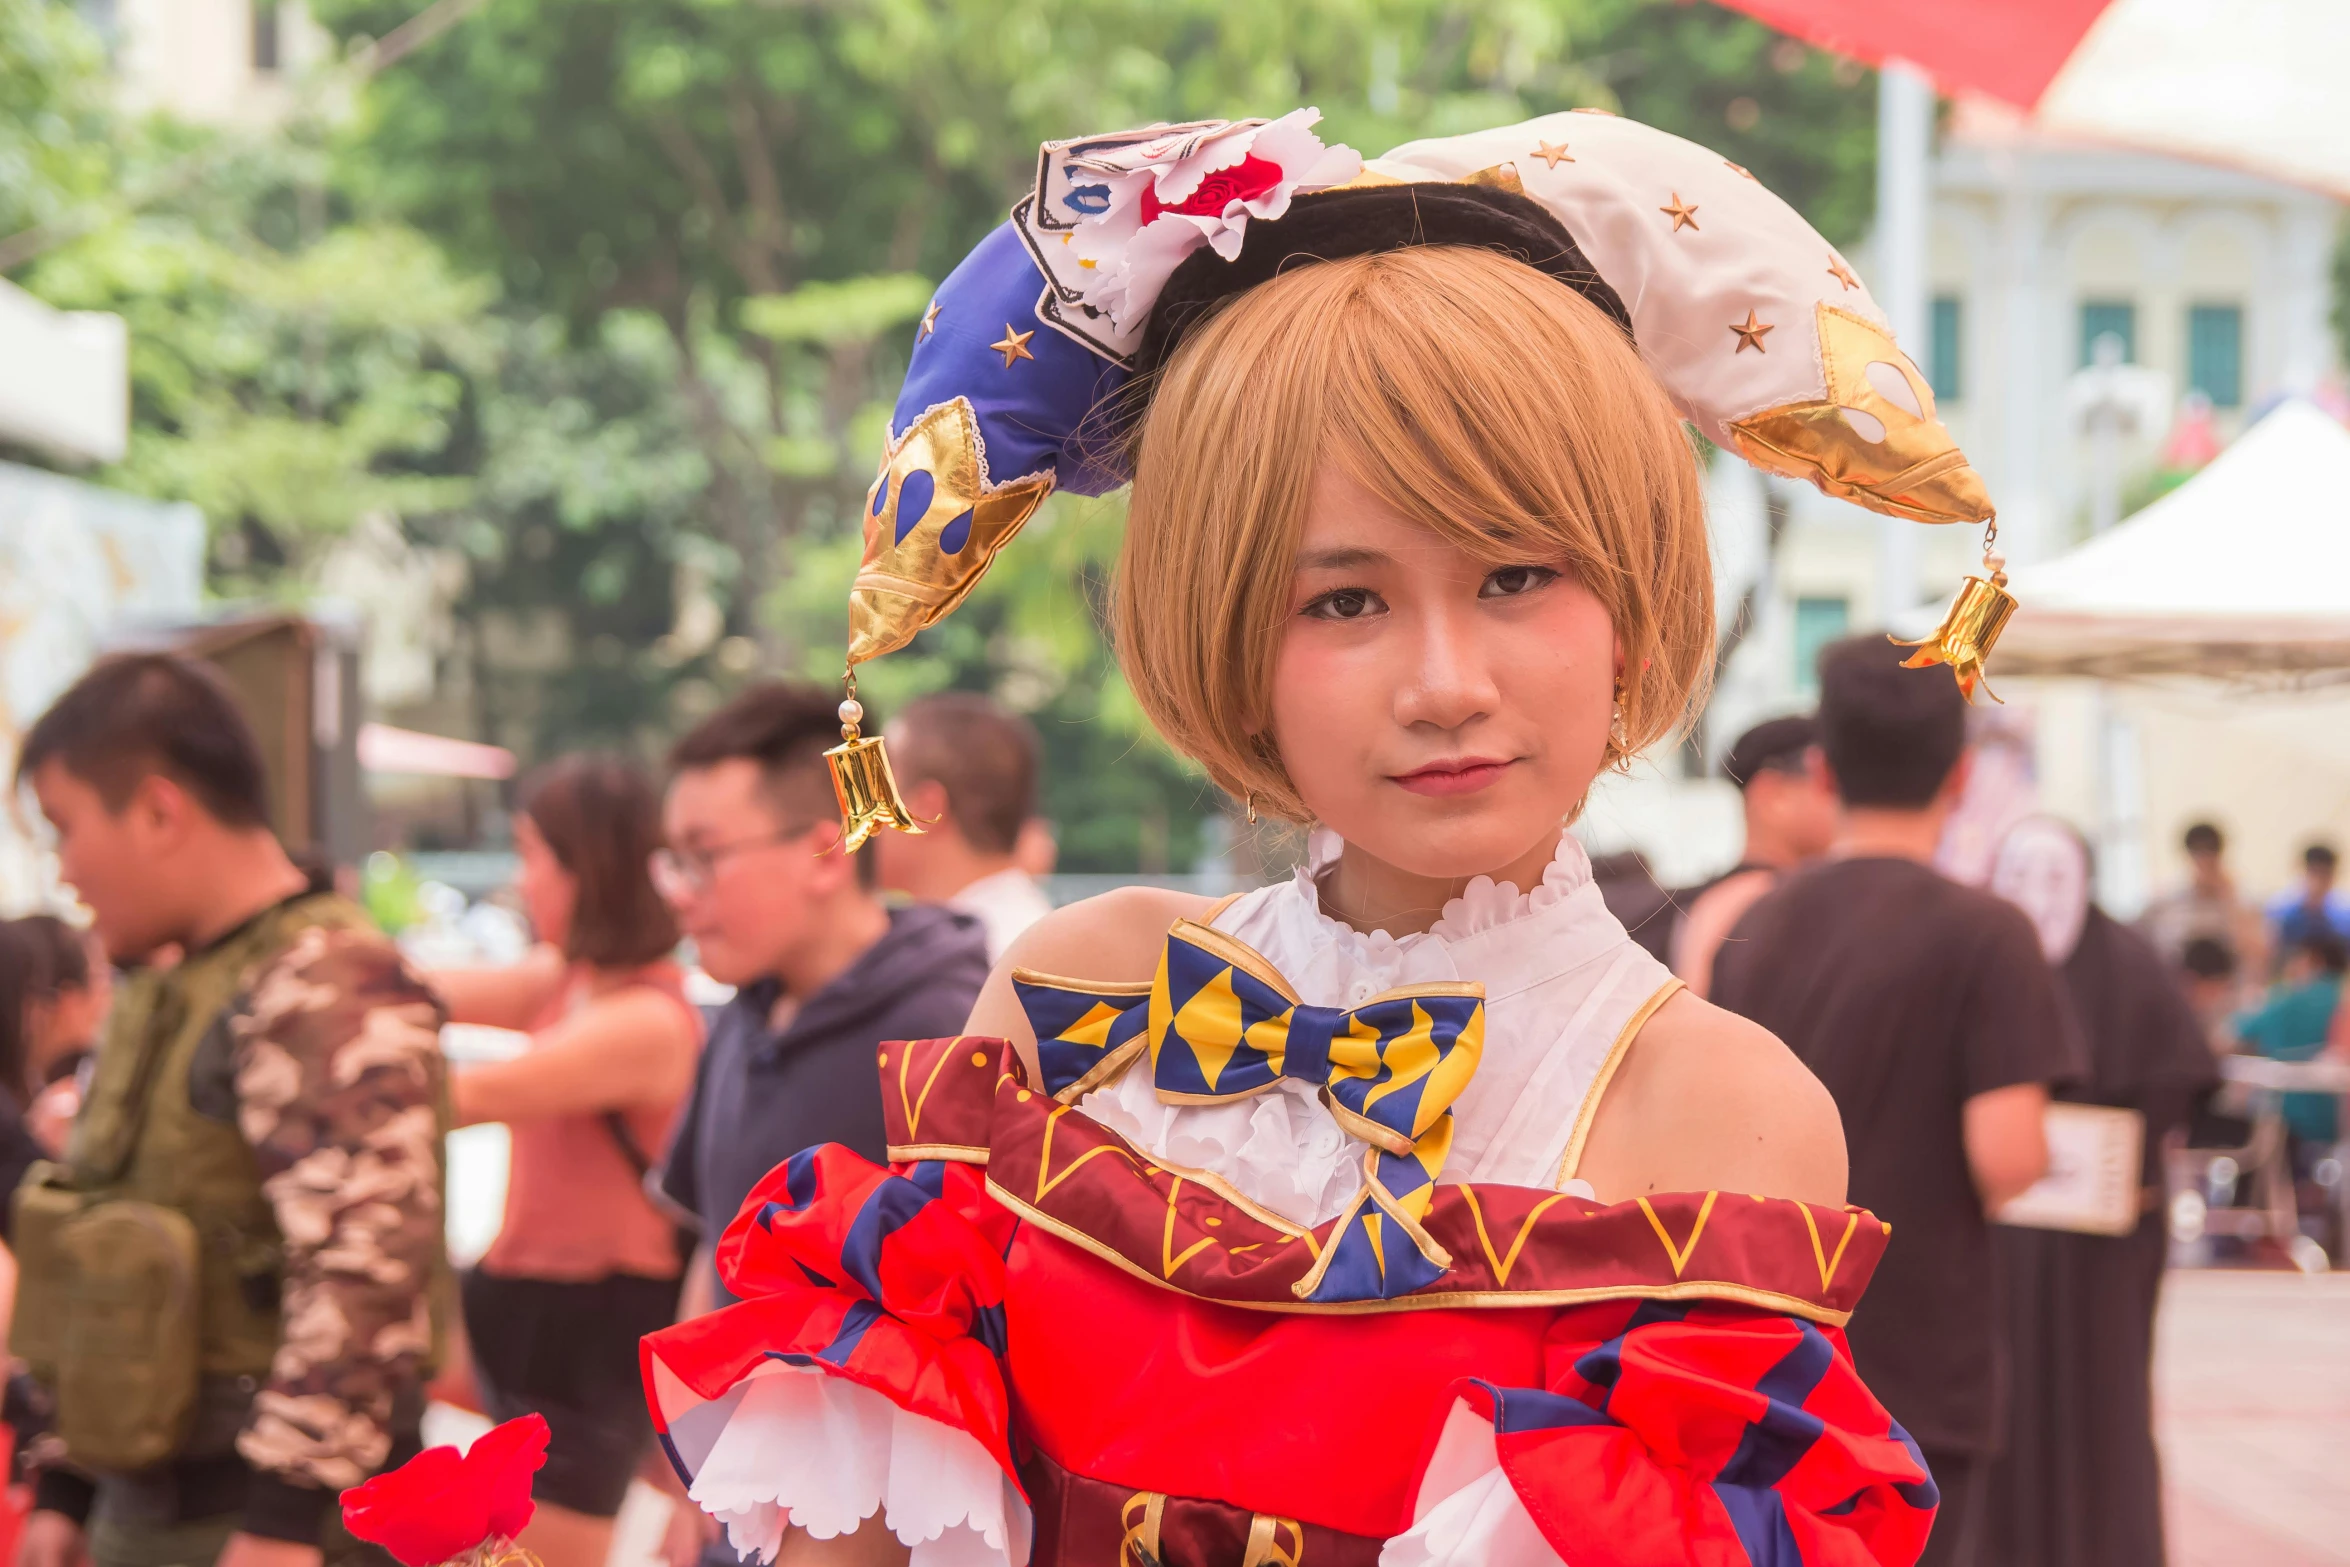 a close up of a person wearing a costume, trending on cg society, shin hanga, music festival, orianna, square enix, vacation photo